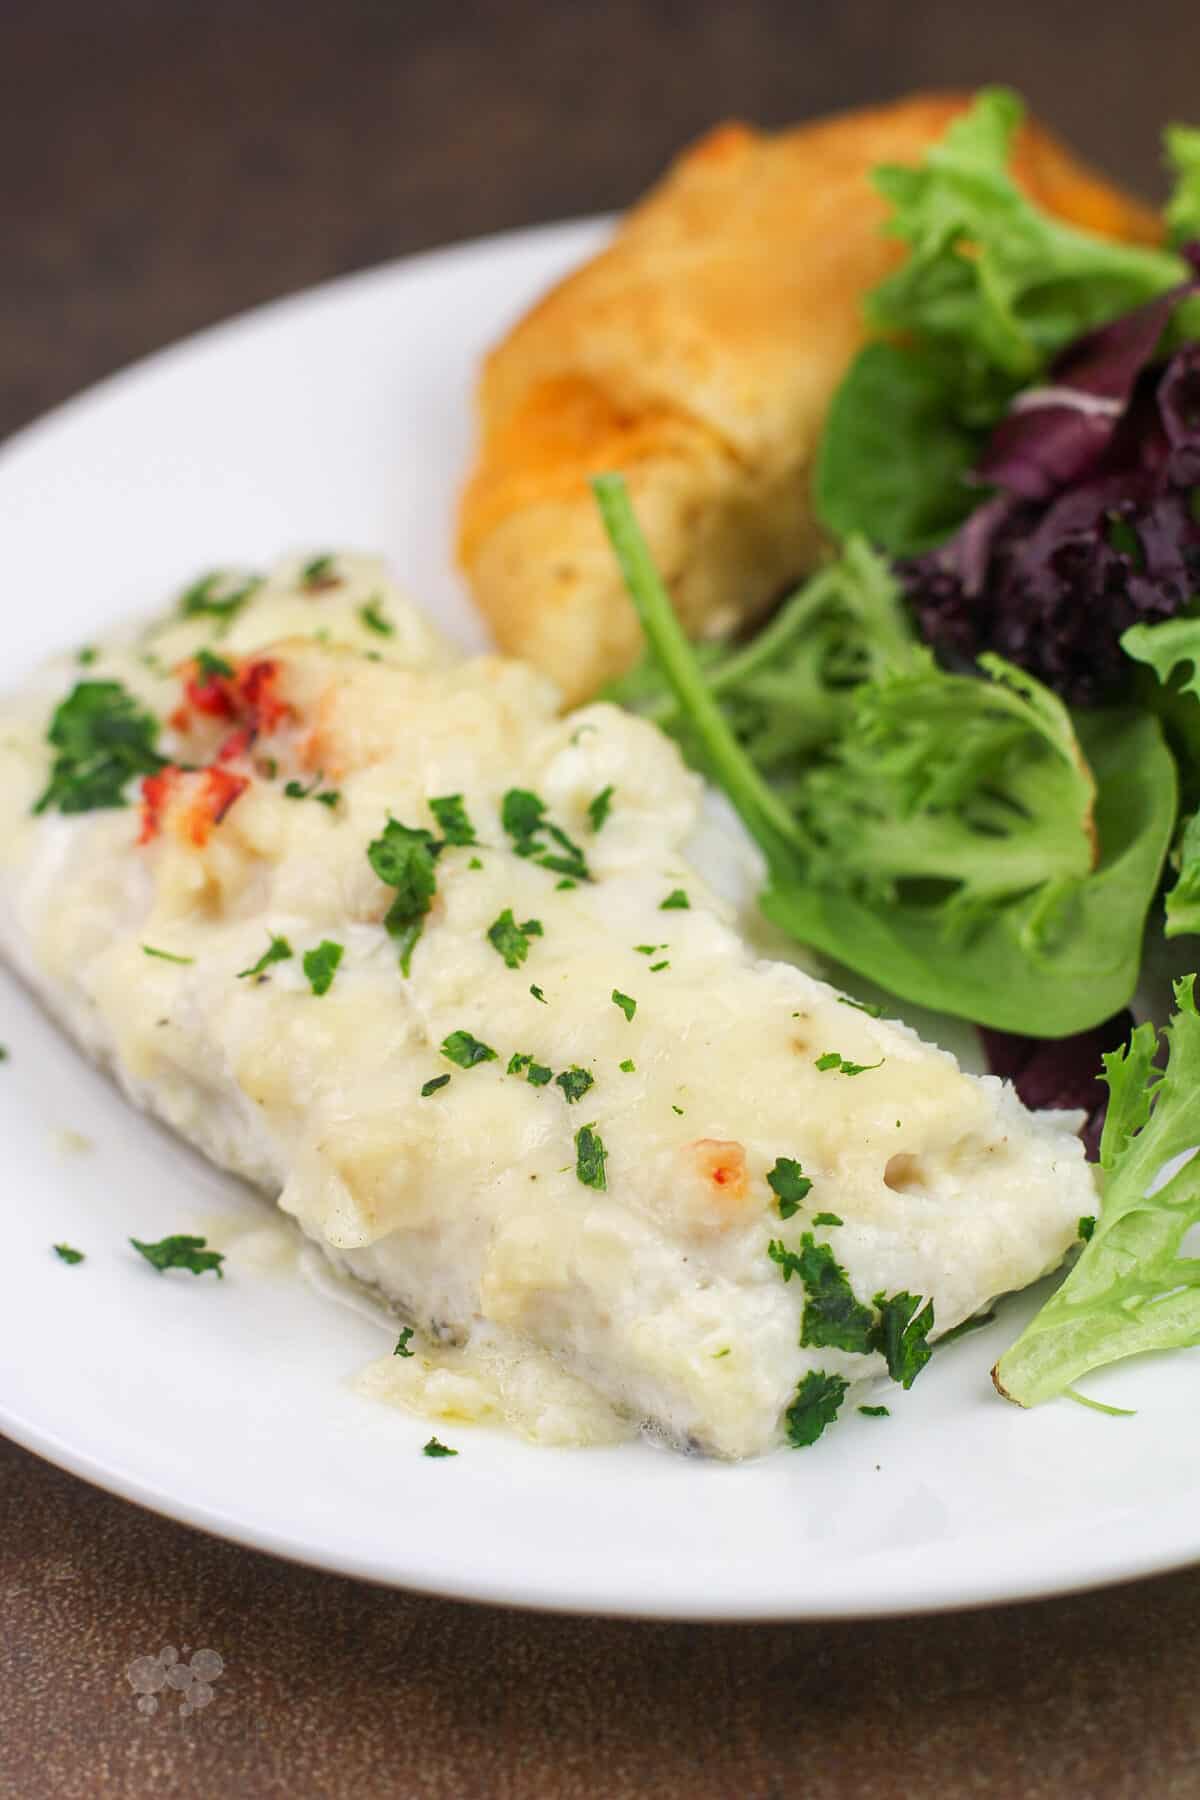 portion of prepared haddock with lobster sauce on white plate with salad and roll